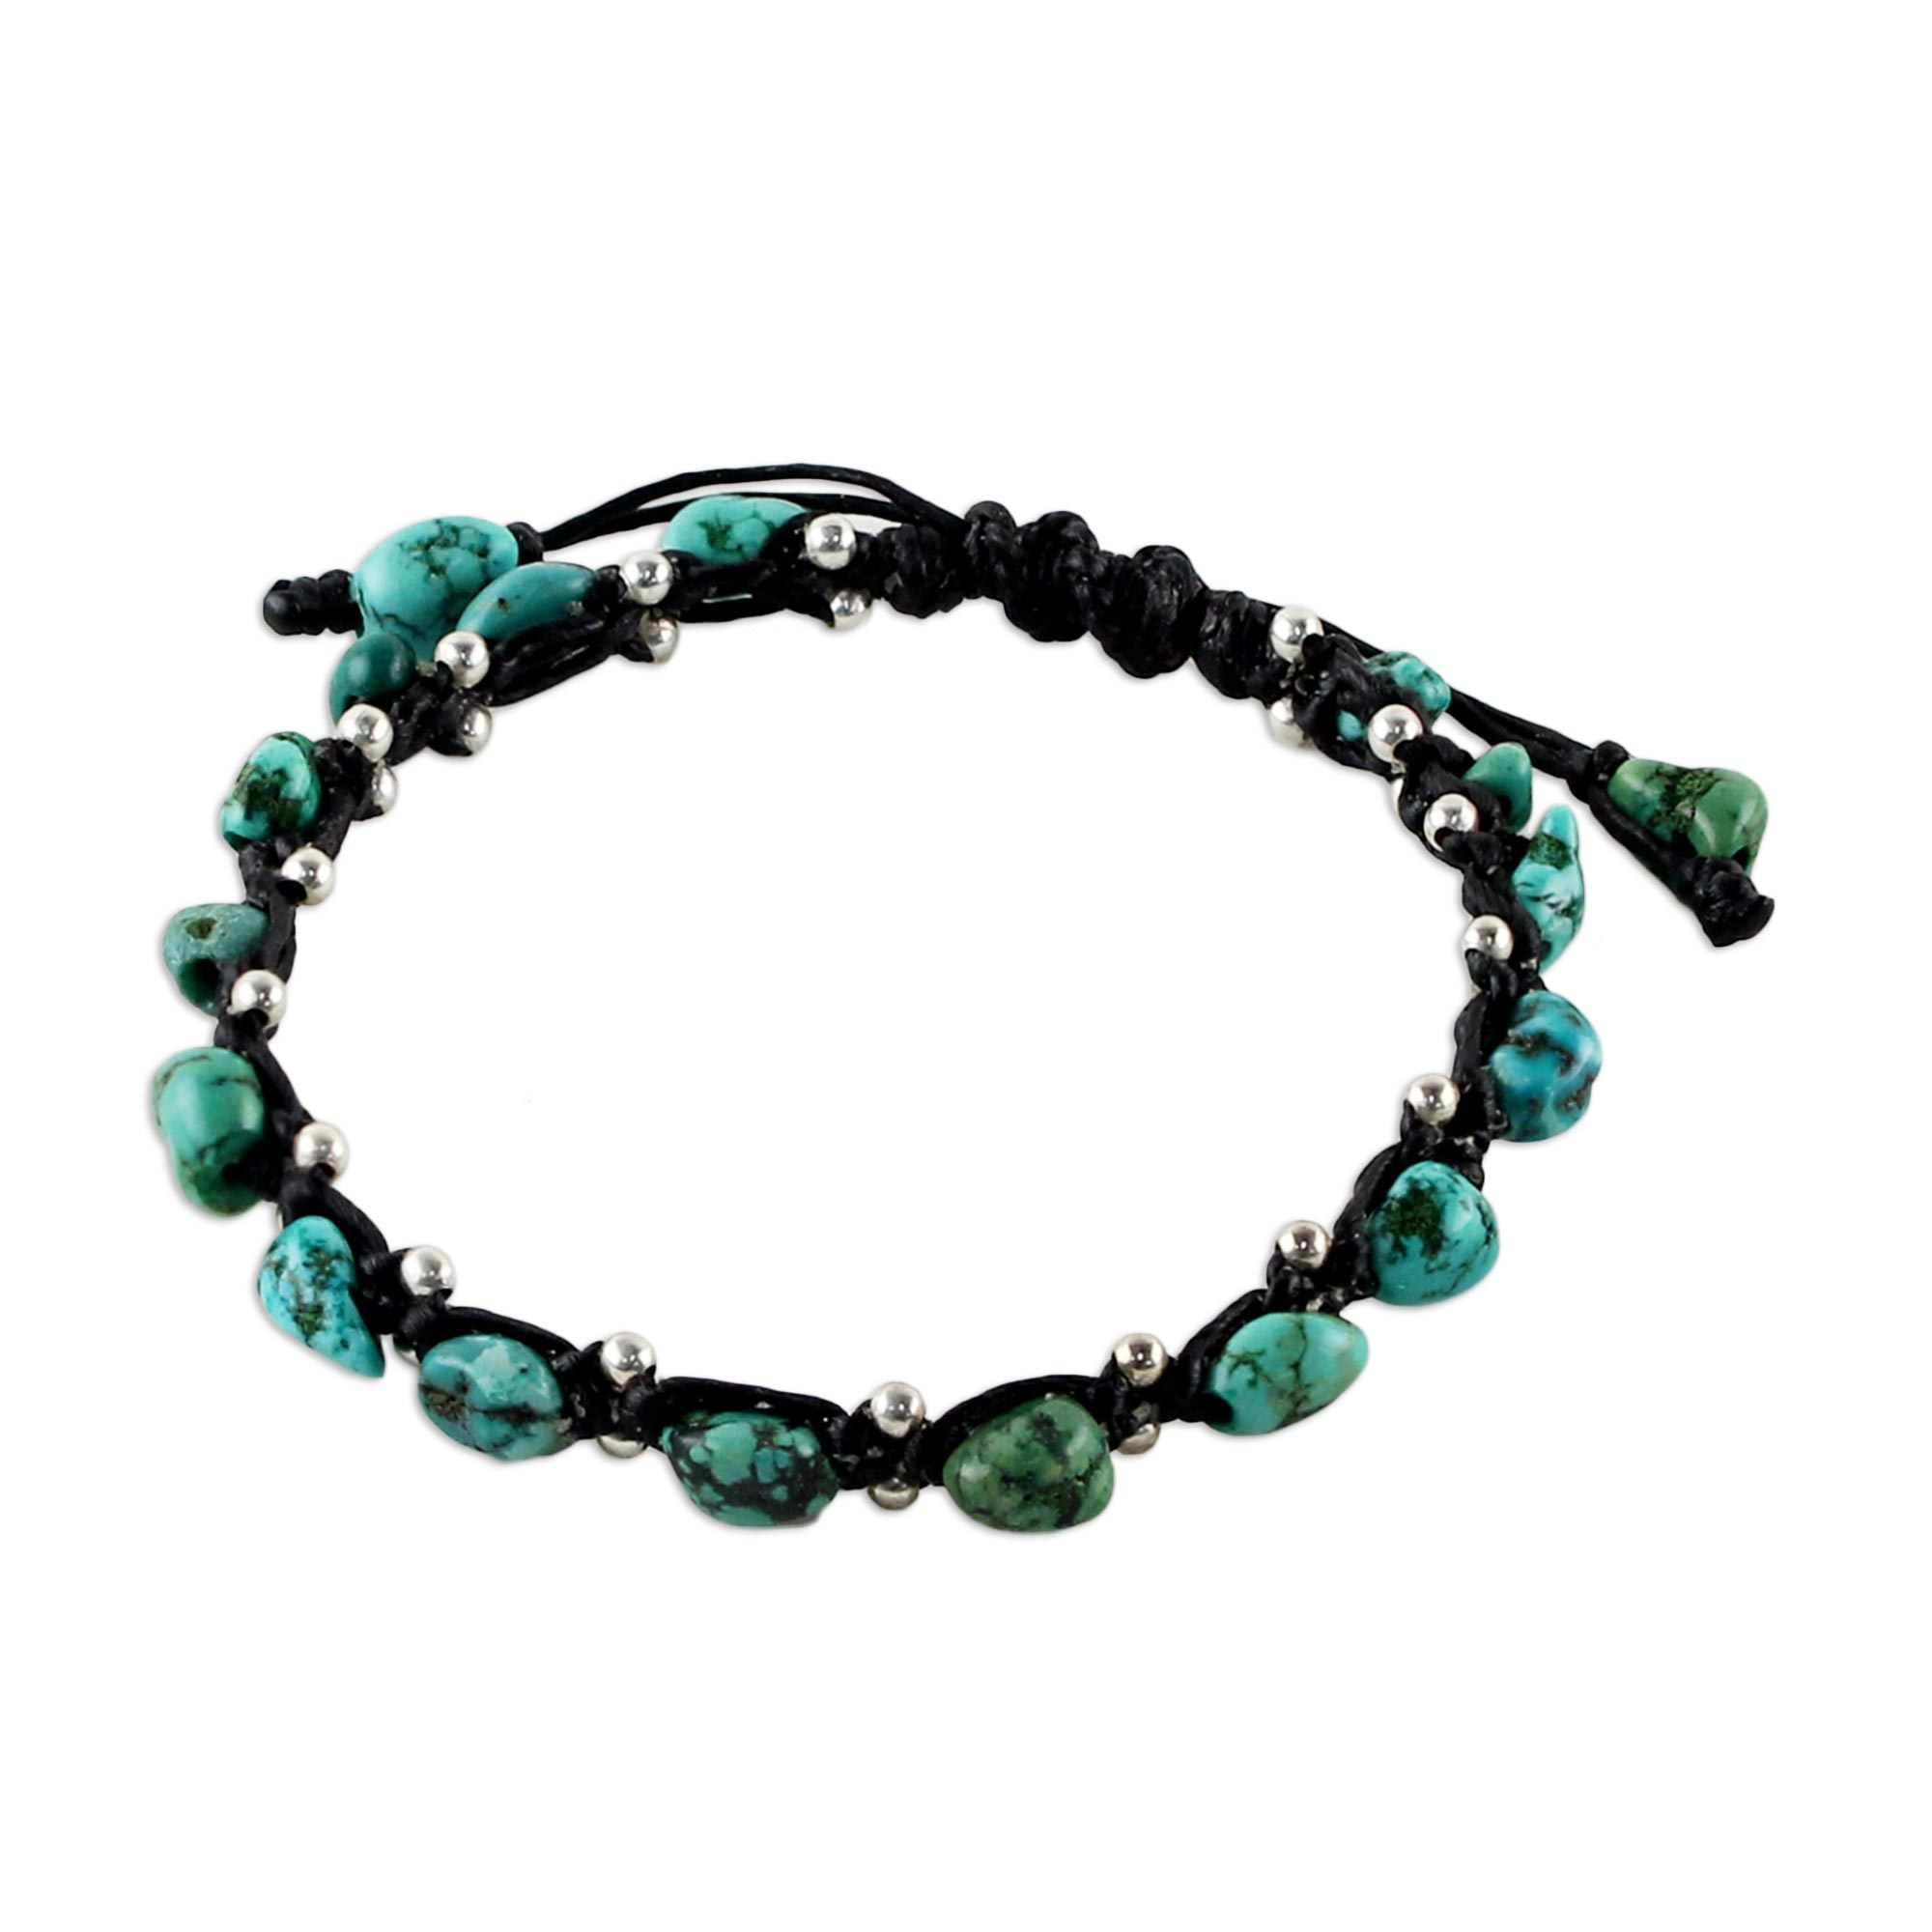 Thai Jewelry Braided Bracelet Turquoise Color 925 Silver - Turquoise ...